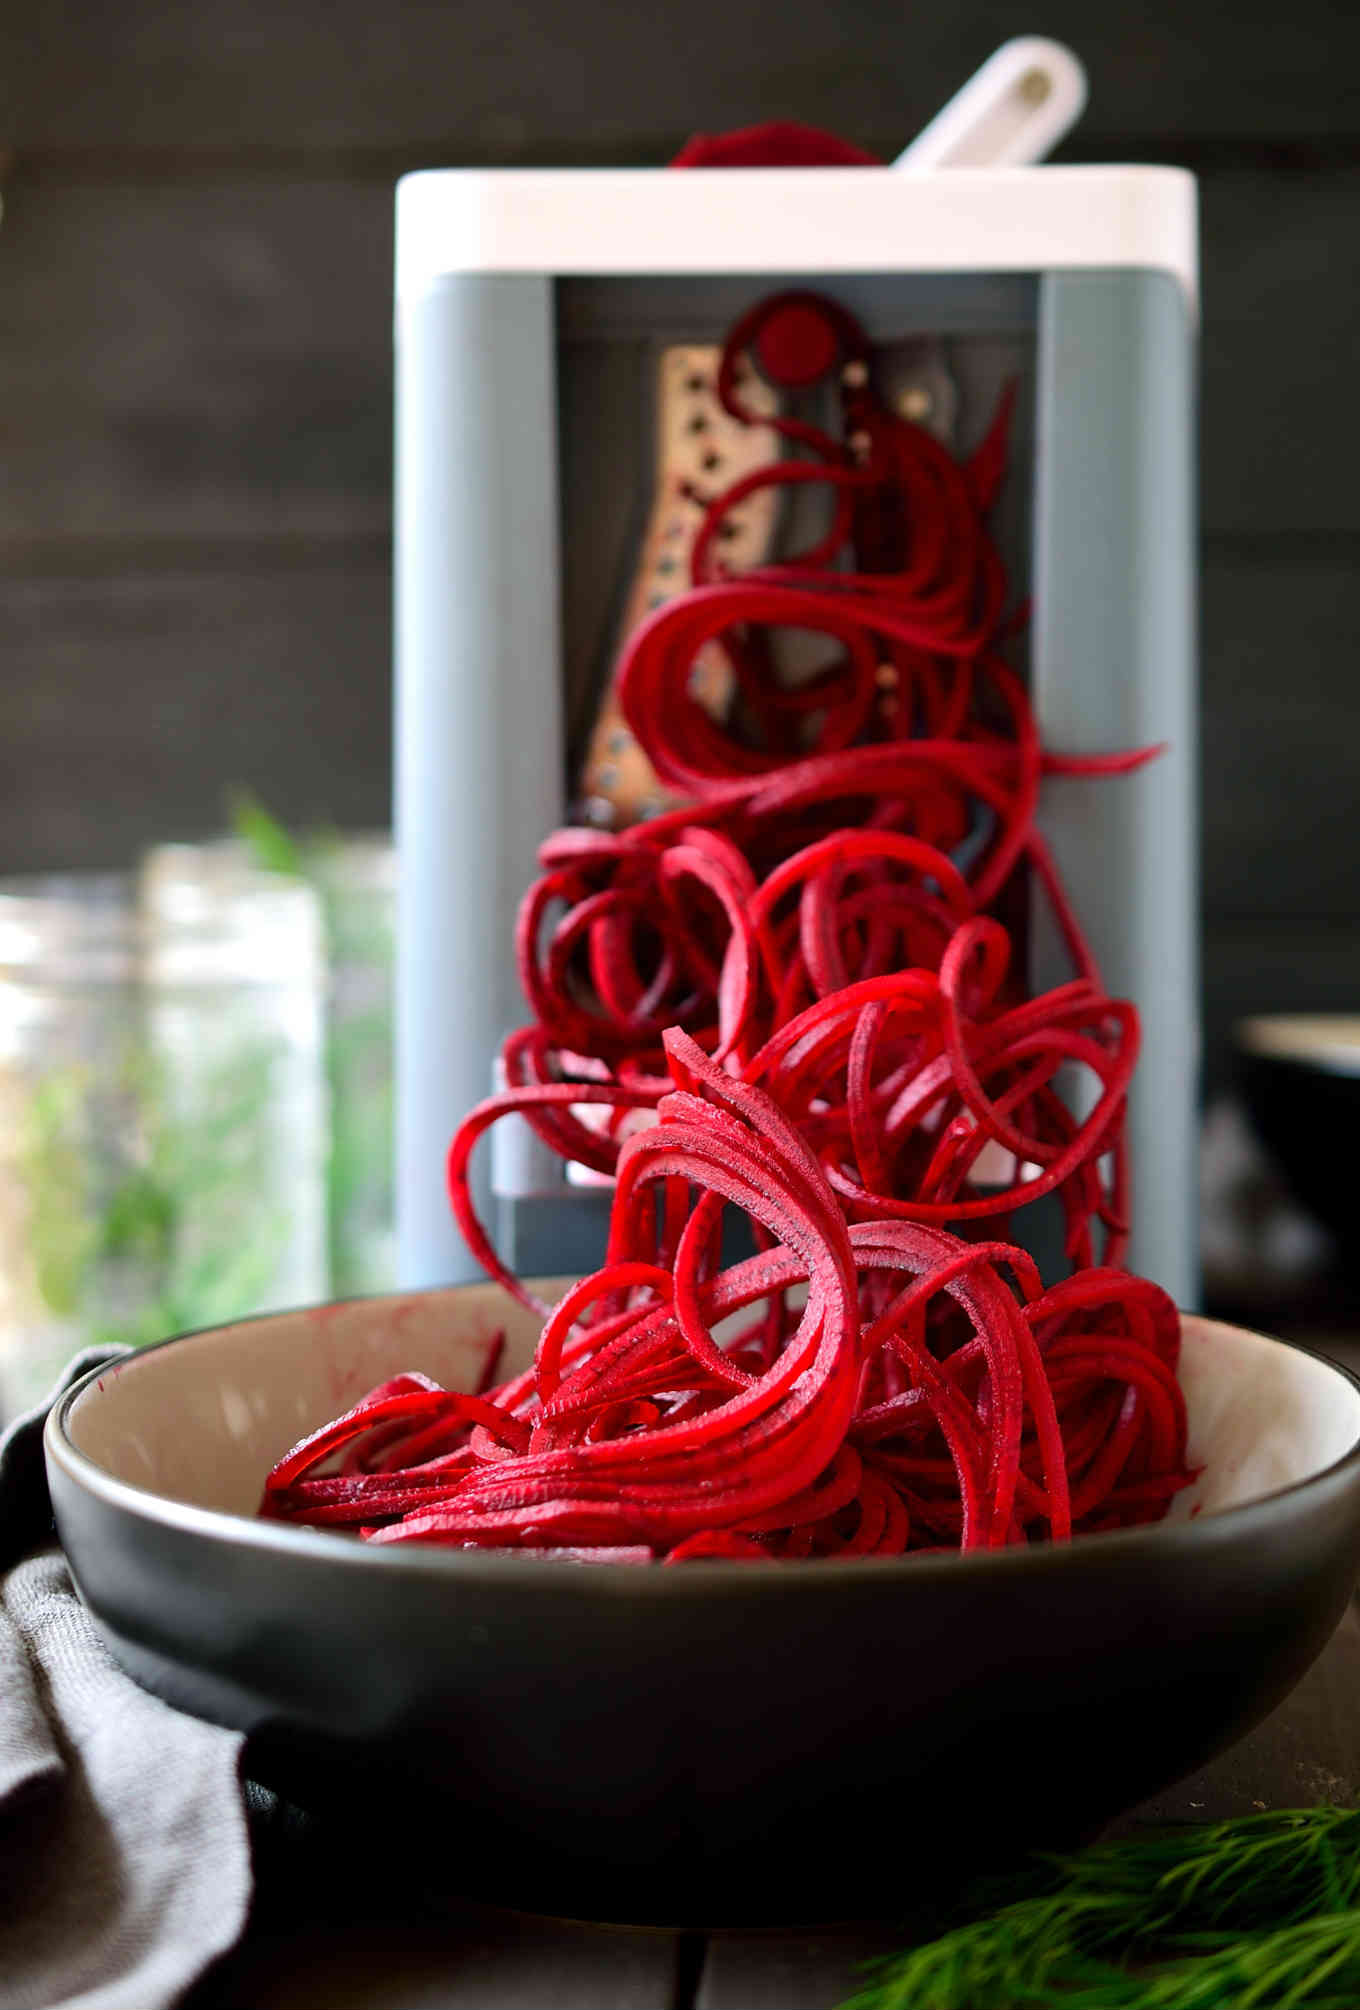 Spiralized fermented beets are an amazingly versatile condiment that’s stupid easy to make and incredibly flavourful. All you need are beets, salt, dill and time to get these delicious sweet and sour beet noodles that you can use in salads, sandwiched, Buddha bowls, avocado toast and much more!